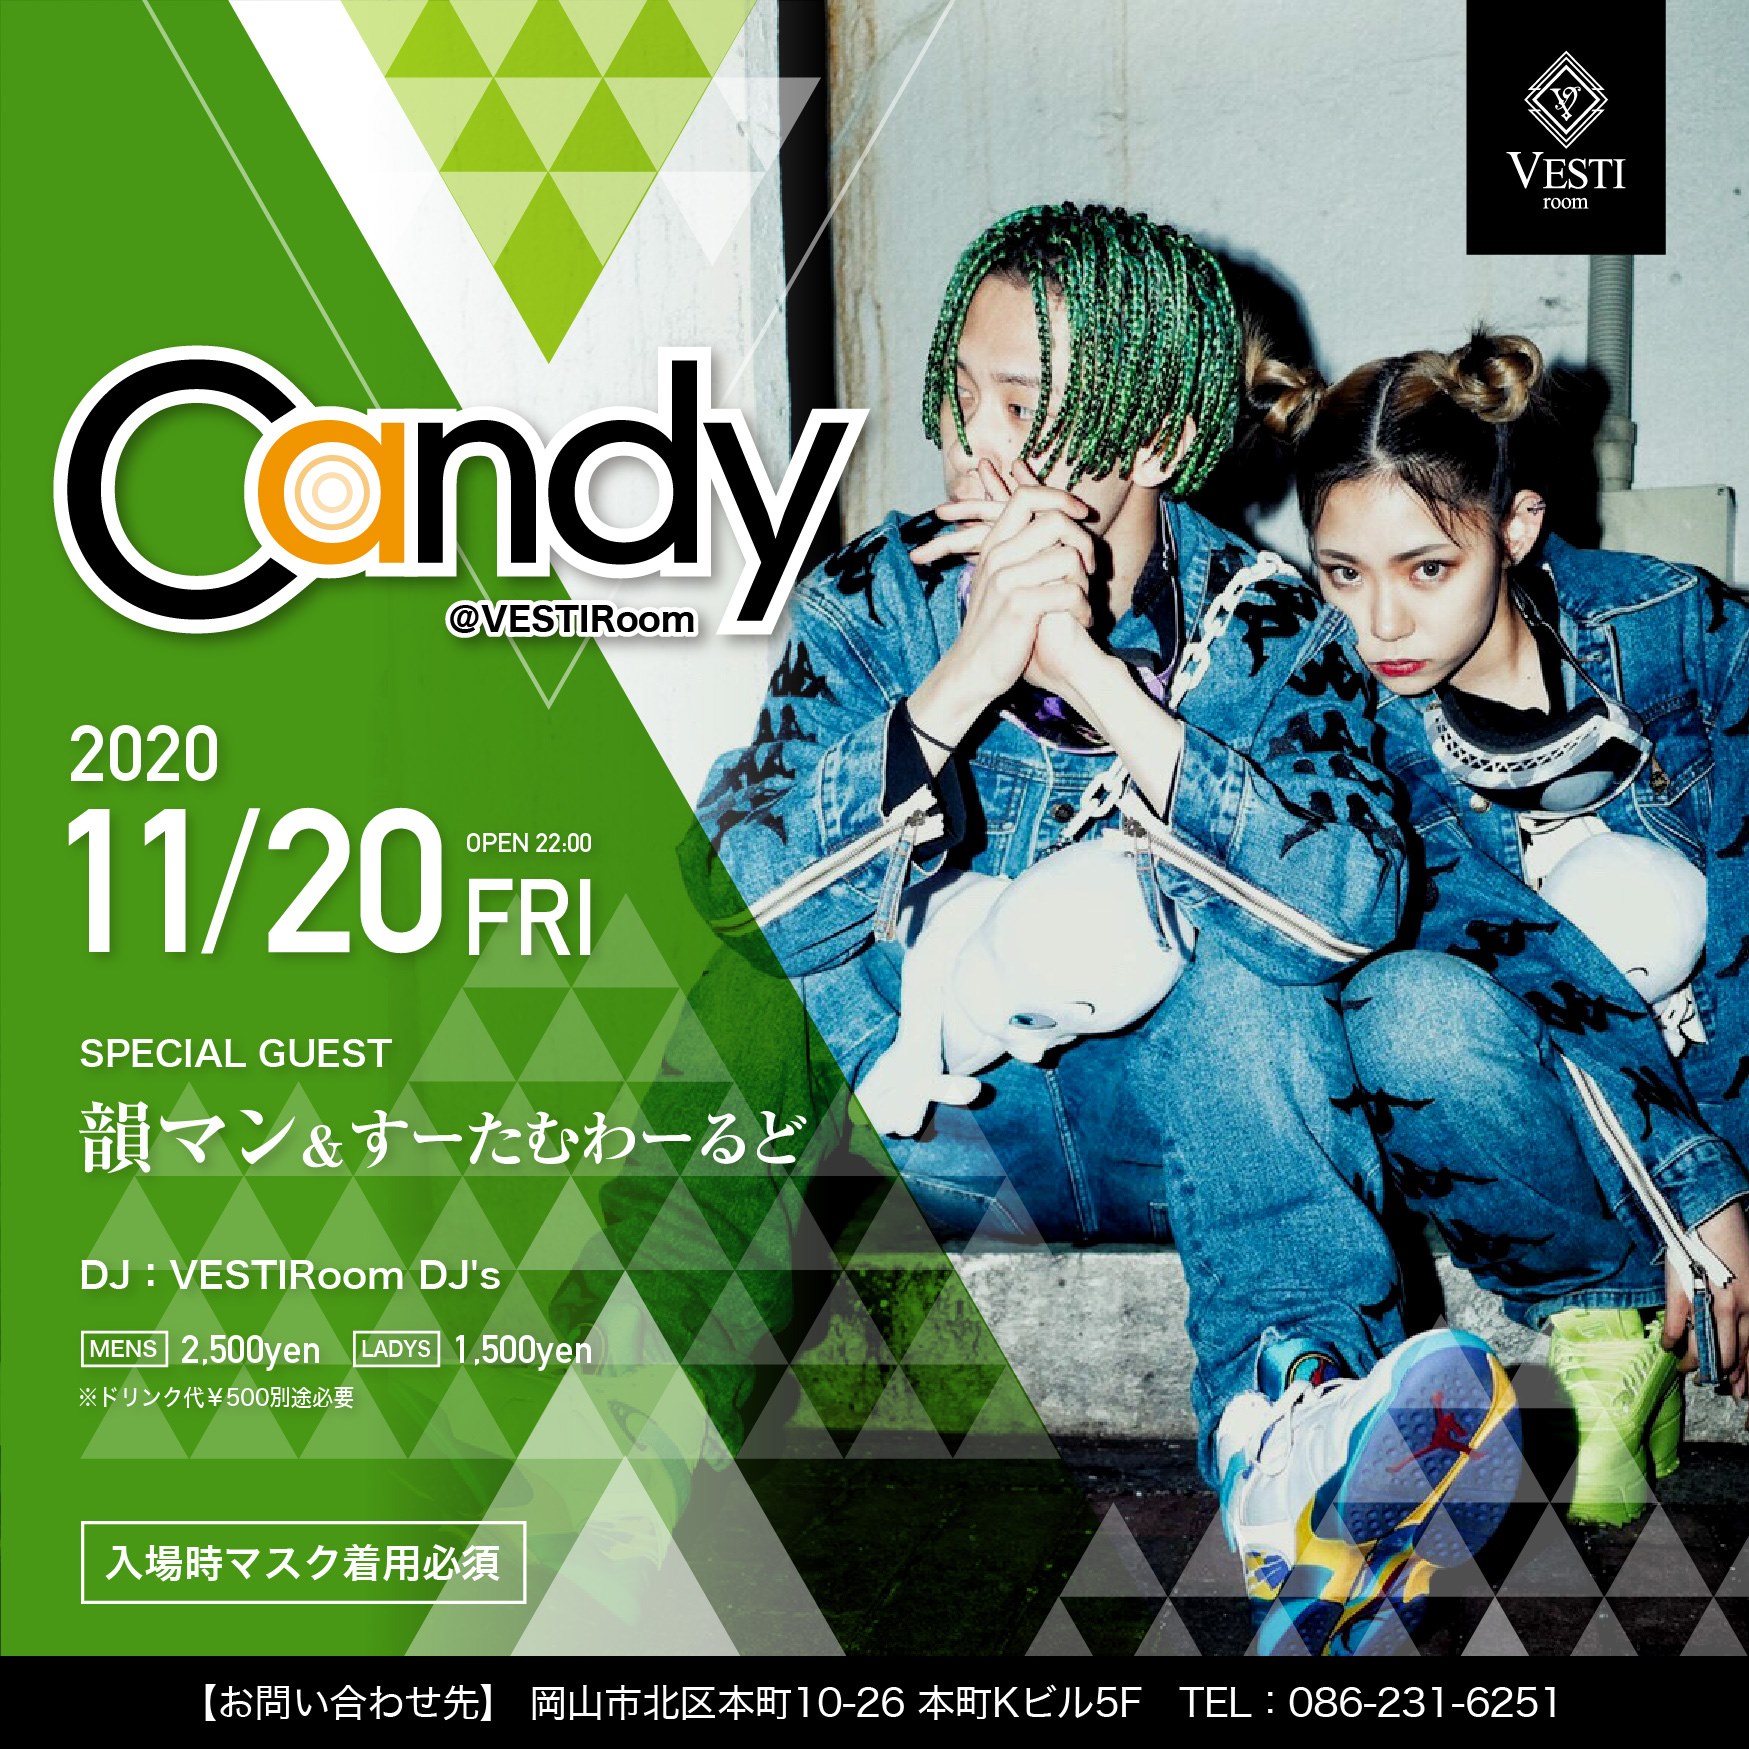 CANDY - Special Guest : 韻マン&すーたむわーるど -